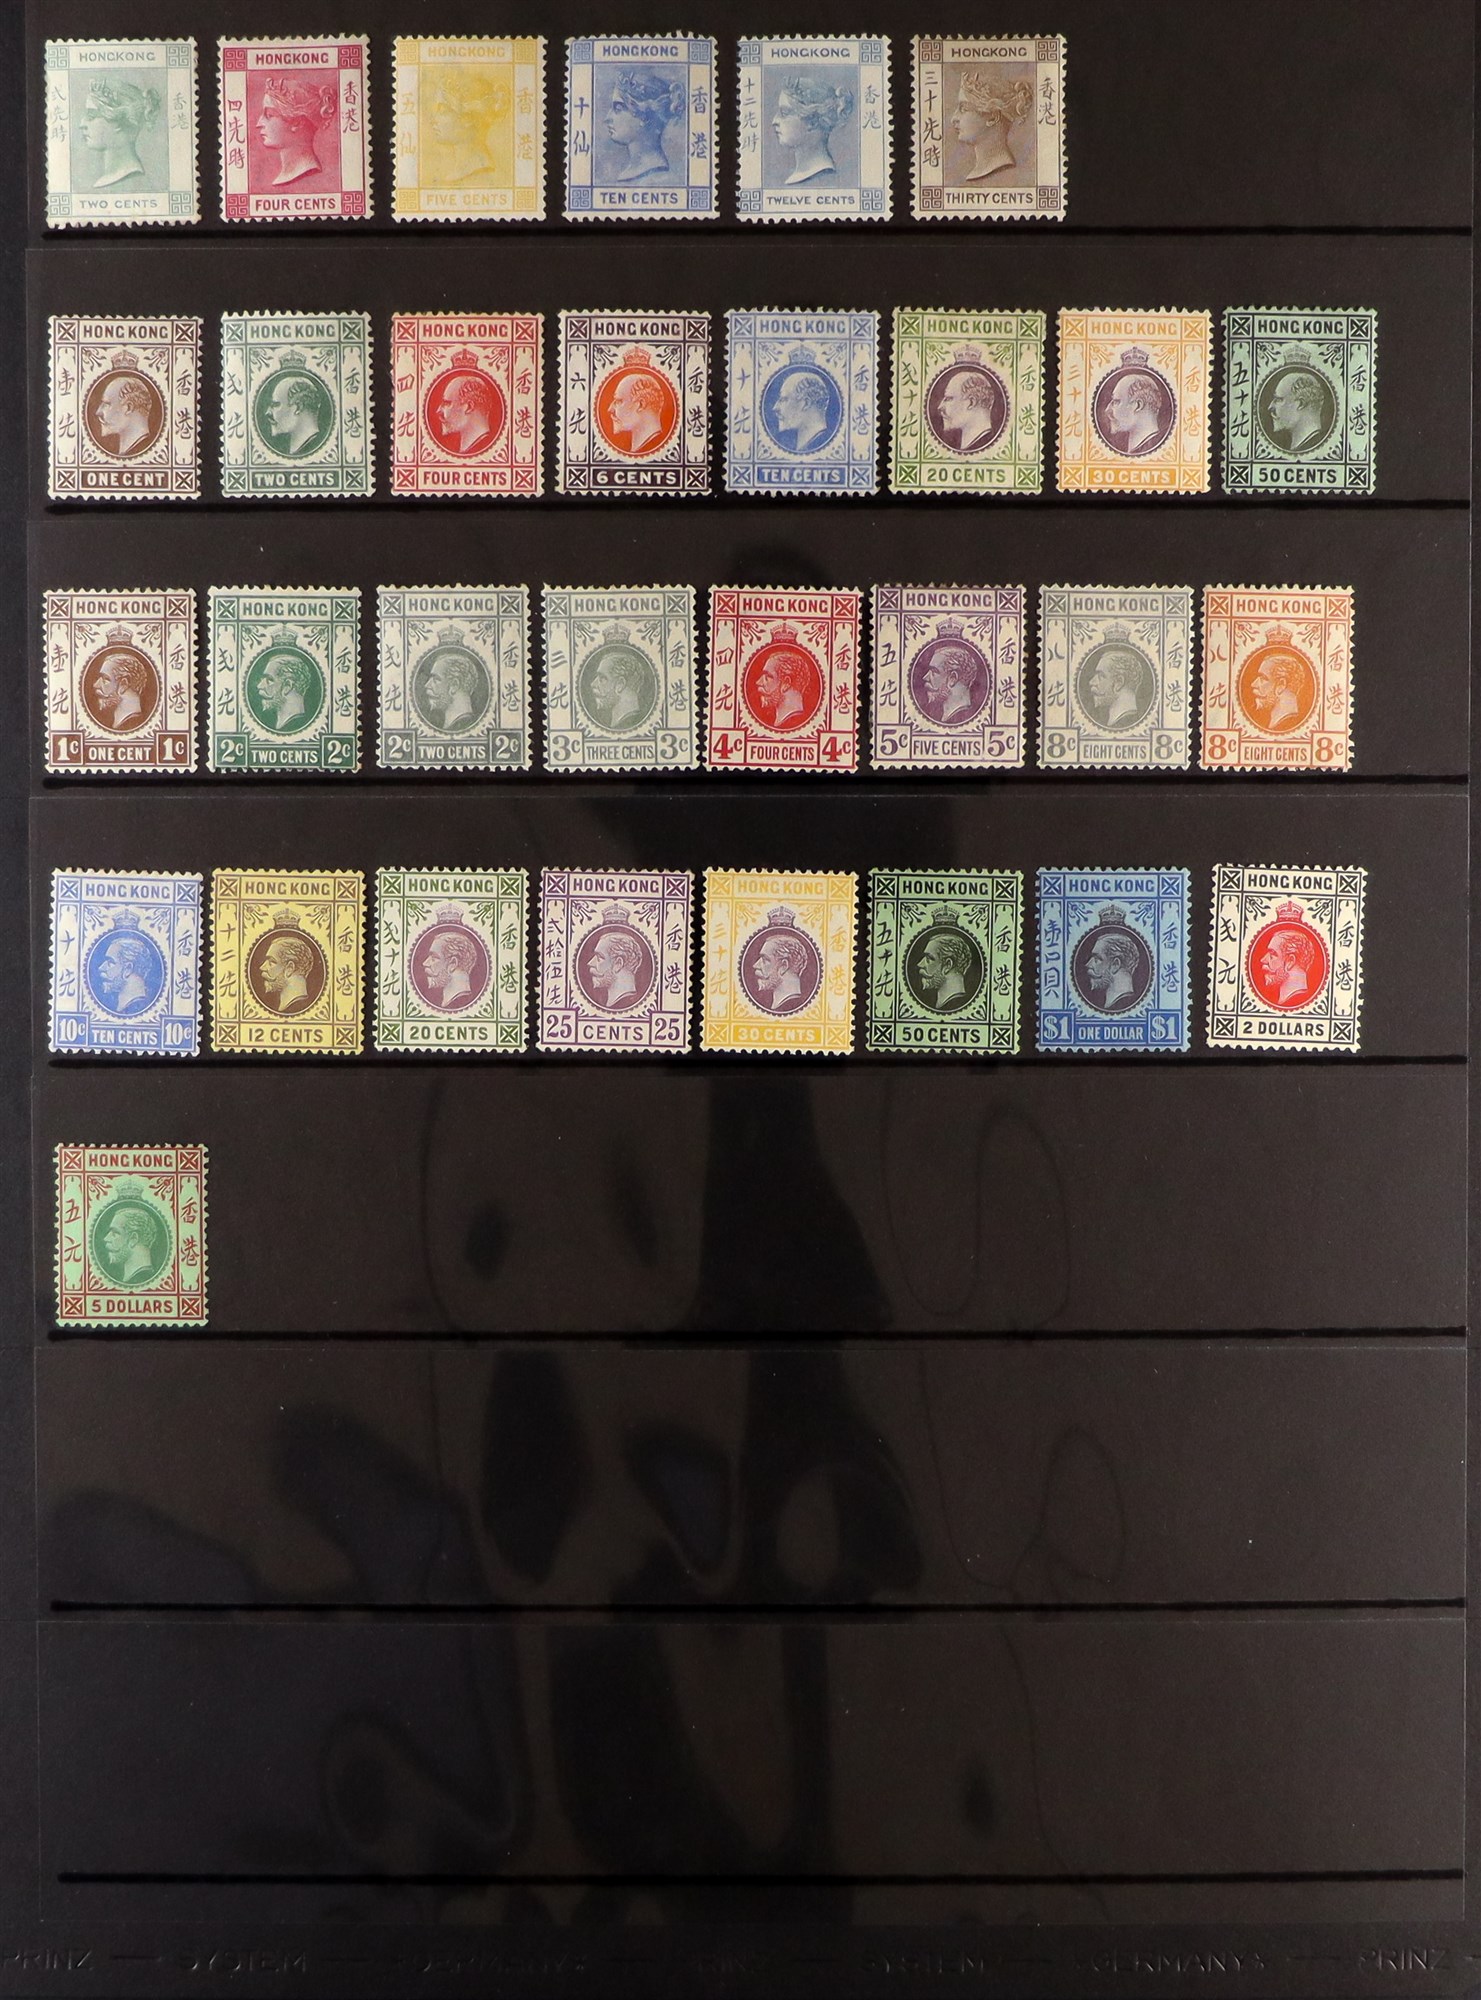 HONG KONG 1900 - 1921 COLLECTION incl. 1900-01 set mint, 1907-11 set to 50c mint, 1921-37 set to $ - Image 2 of 2